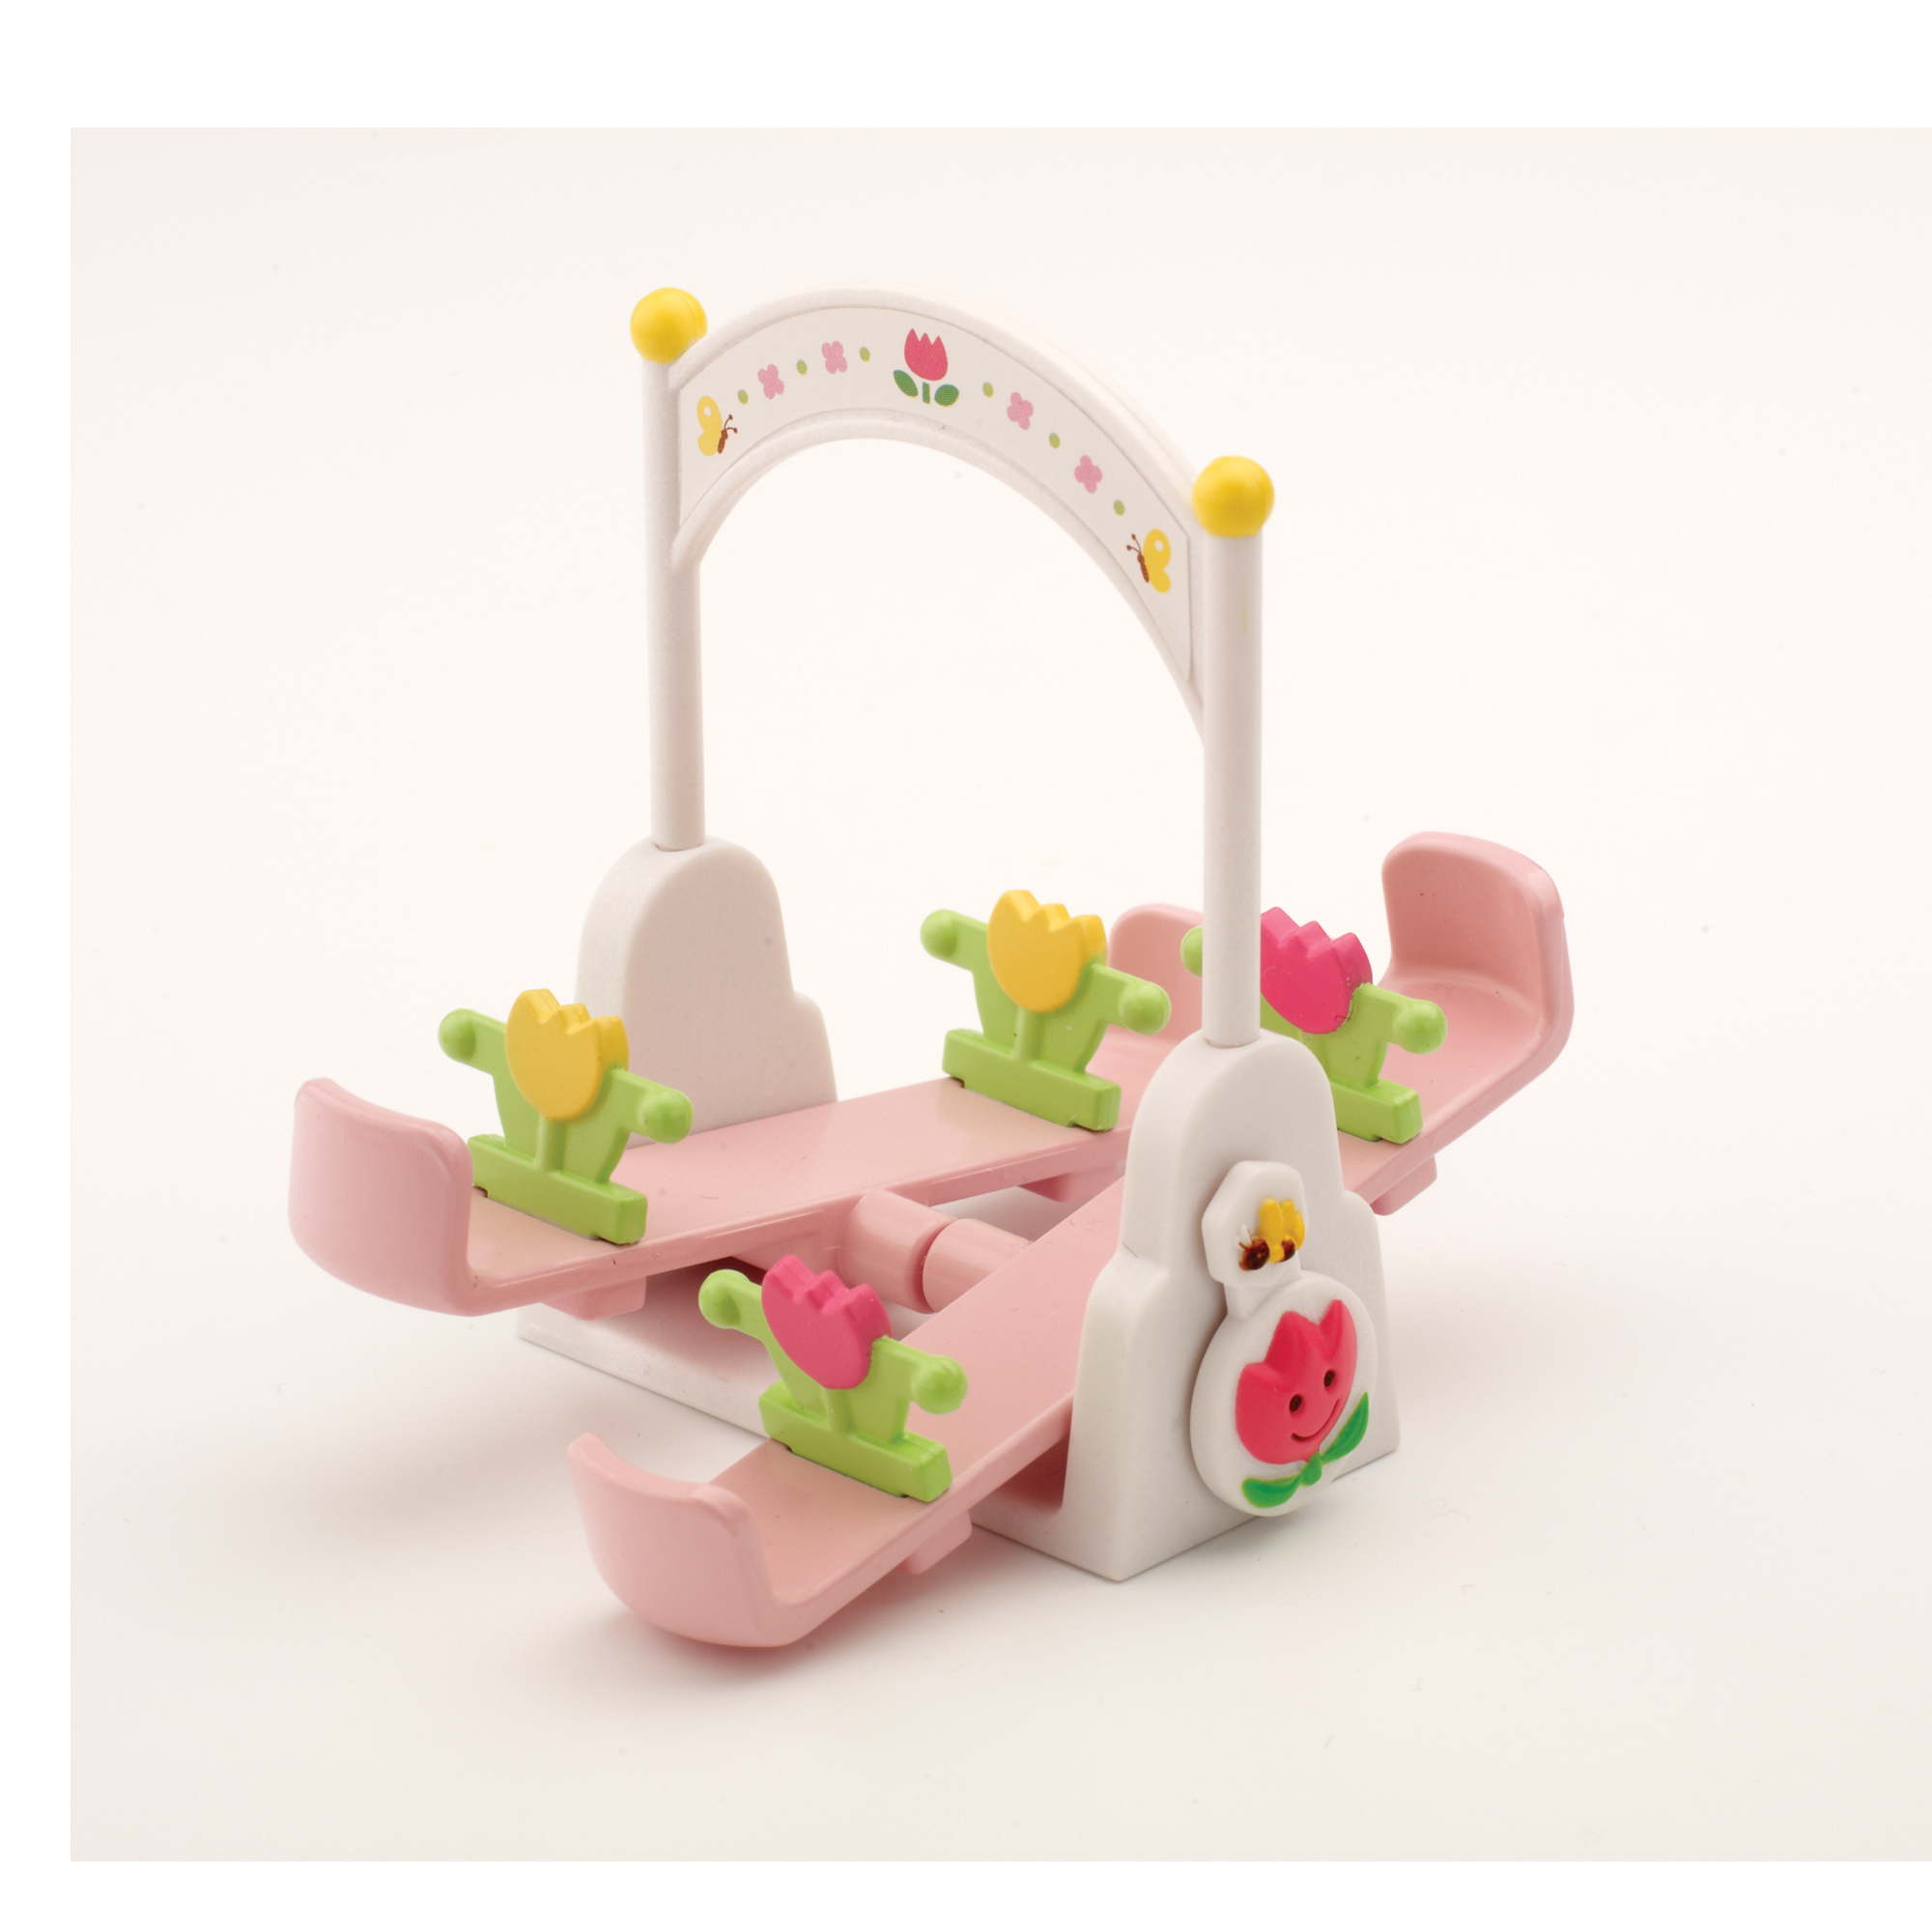 Sylvanian Families baby double see-saw